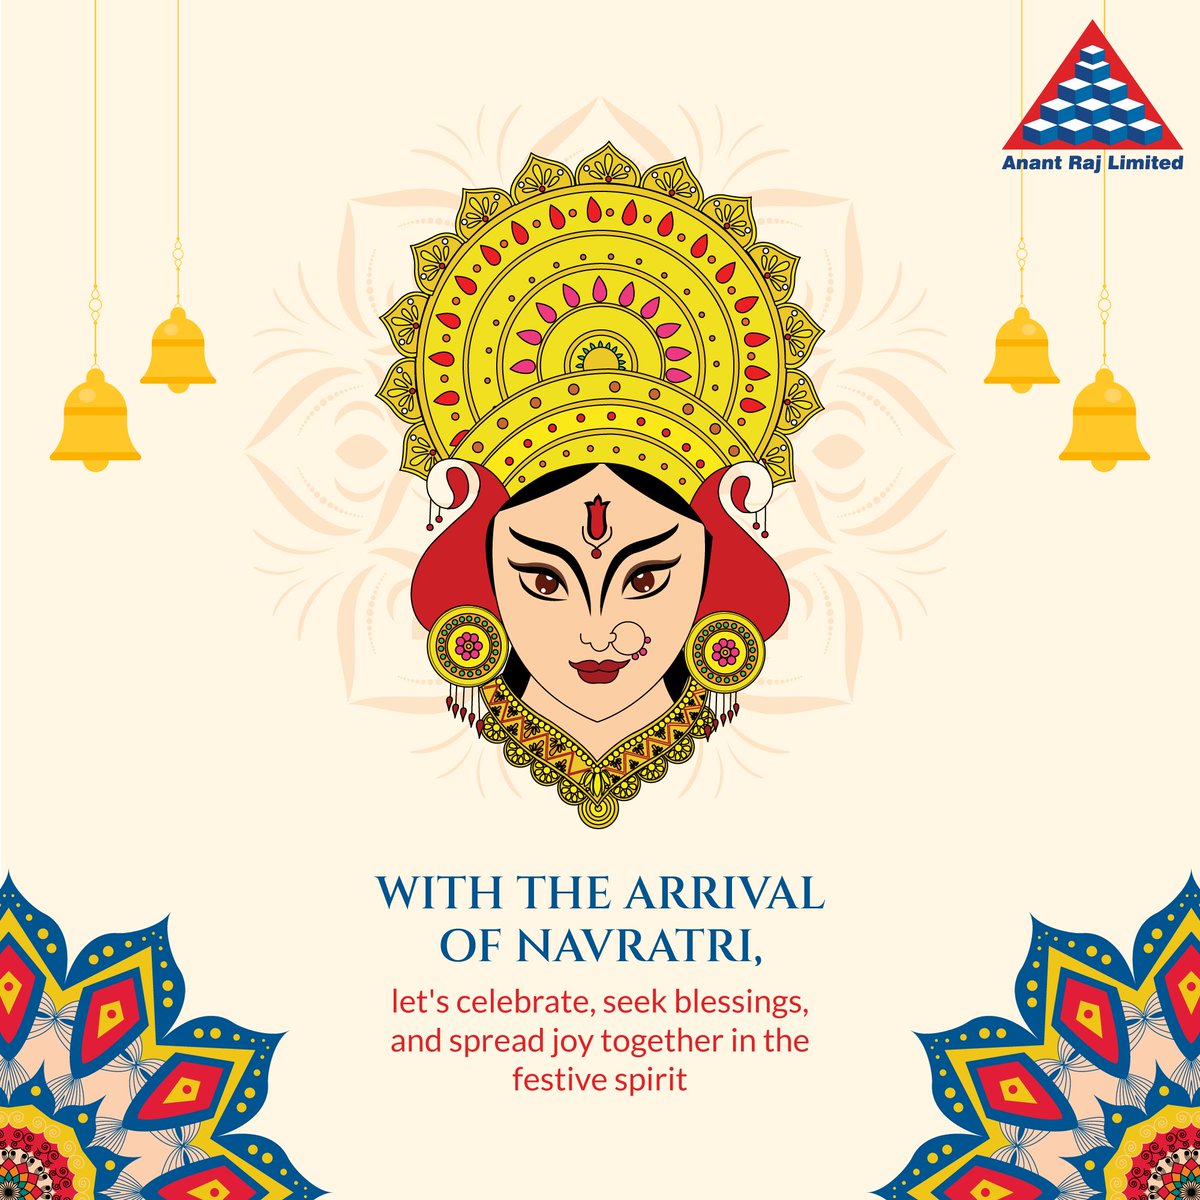 Embrace the joyous spirit of Navratri! Let's celebrate, seek blessings, and spread joy together as we welcome this auspicious festival.​
.
.
.
#AnantRajLimited #FestiveSpirit #SpreadJoy #HappyNavratri #Navratriwishes #NavratriSpecial